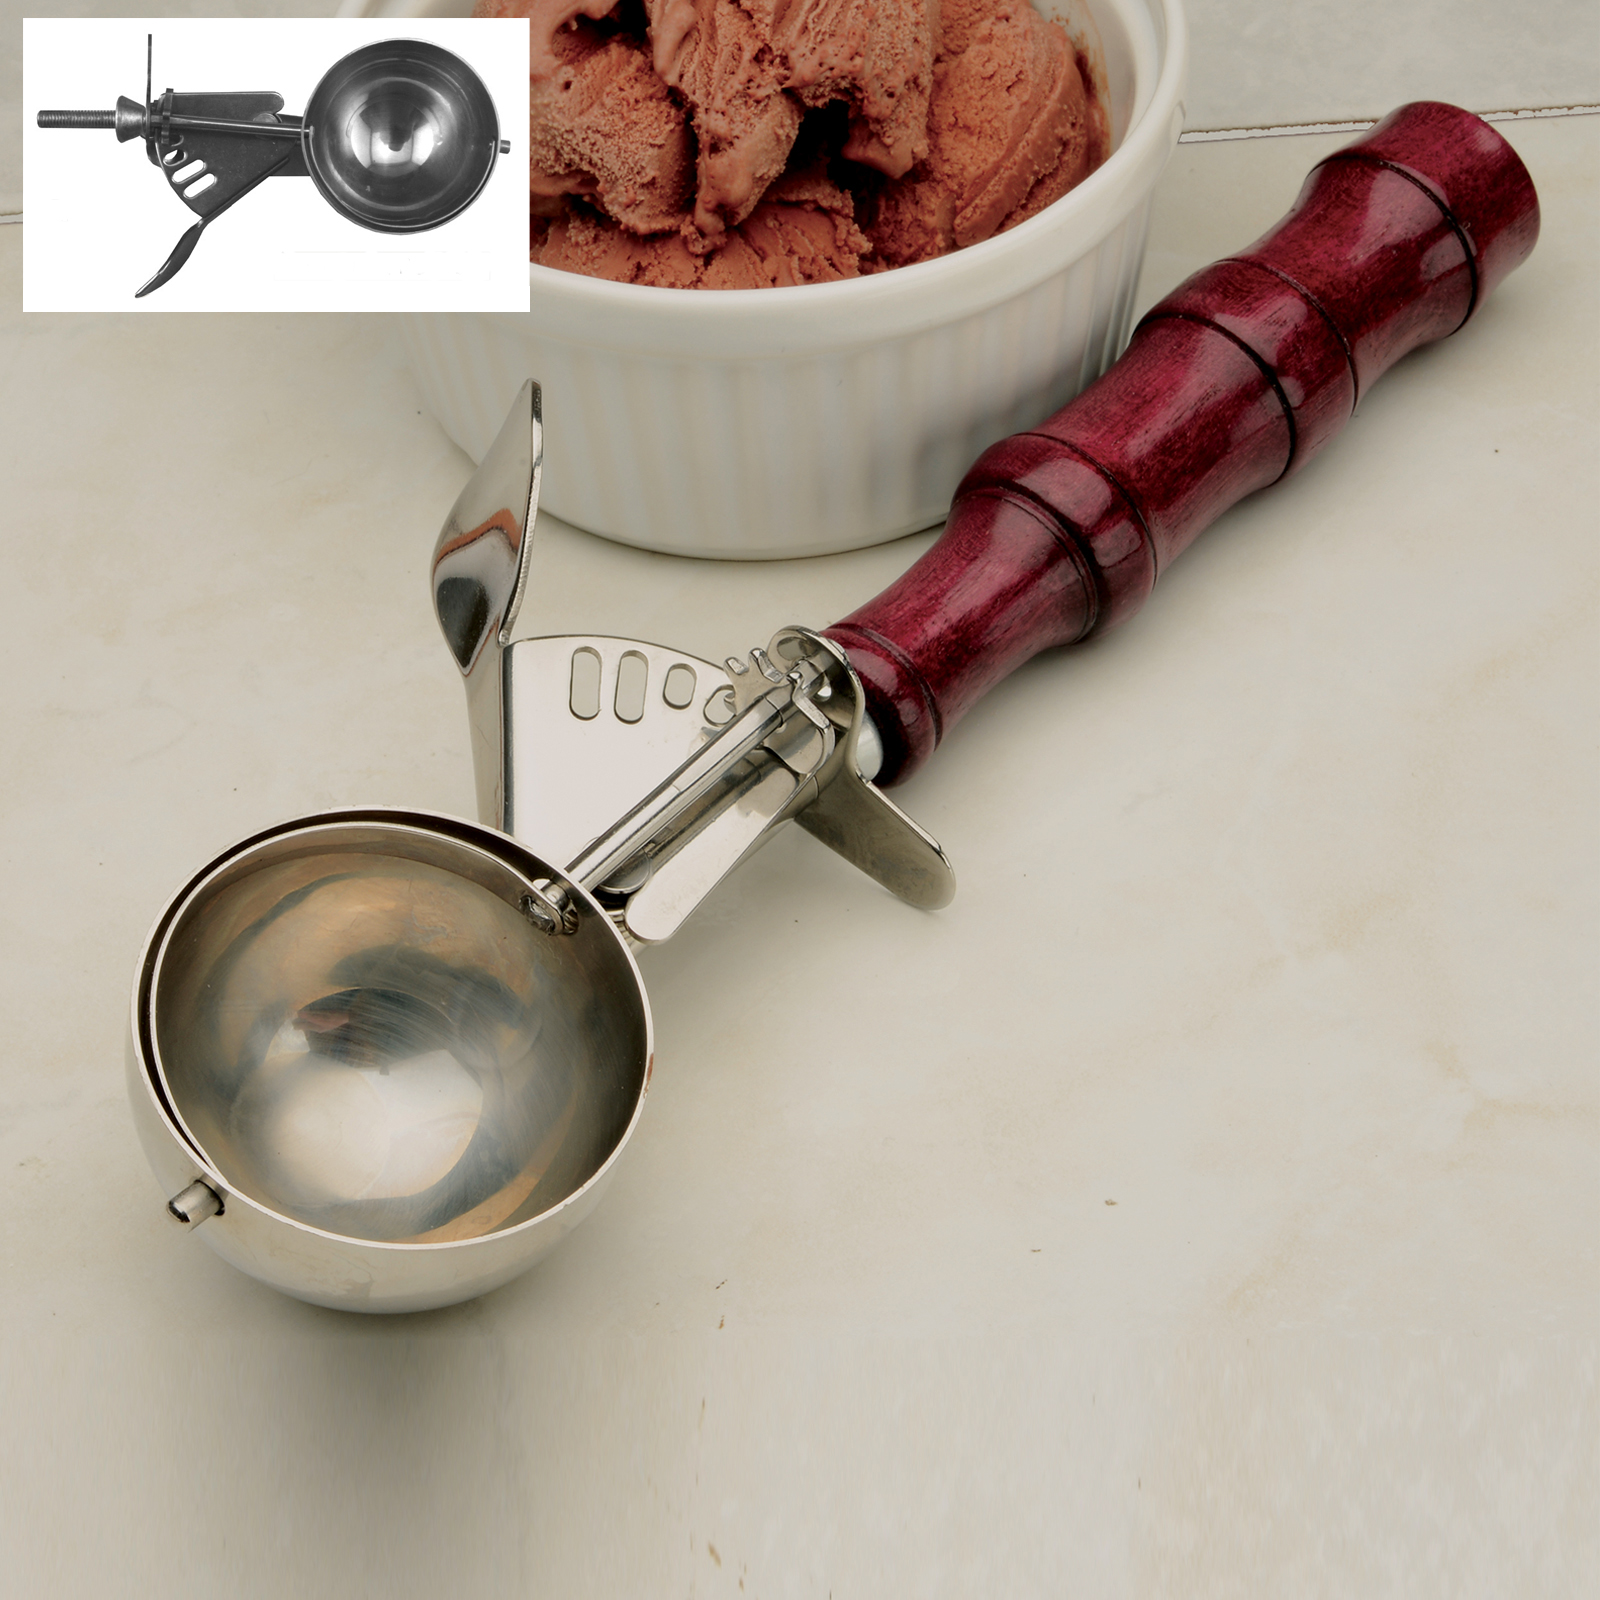 Ice Cream Scoop Disher Kit at Penn State Industries